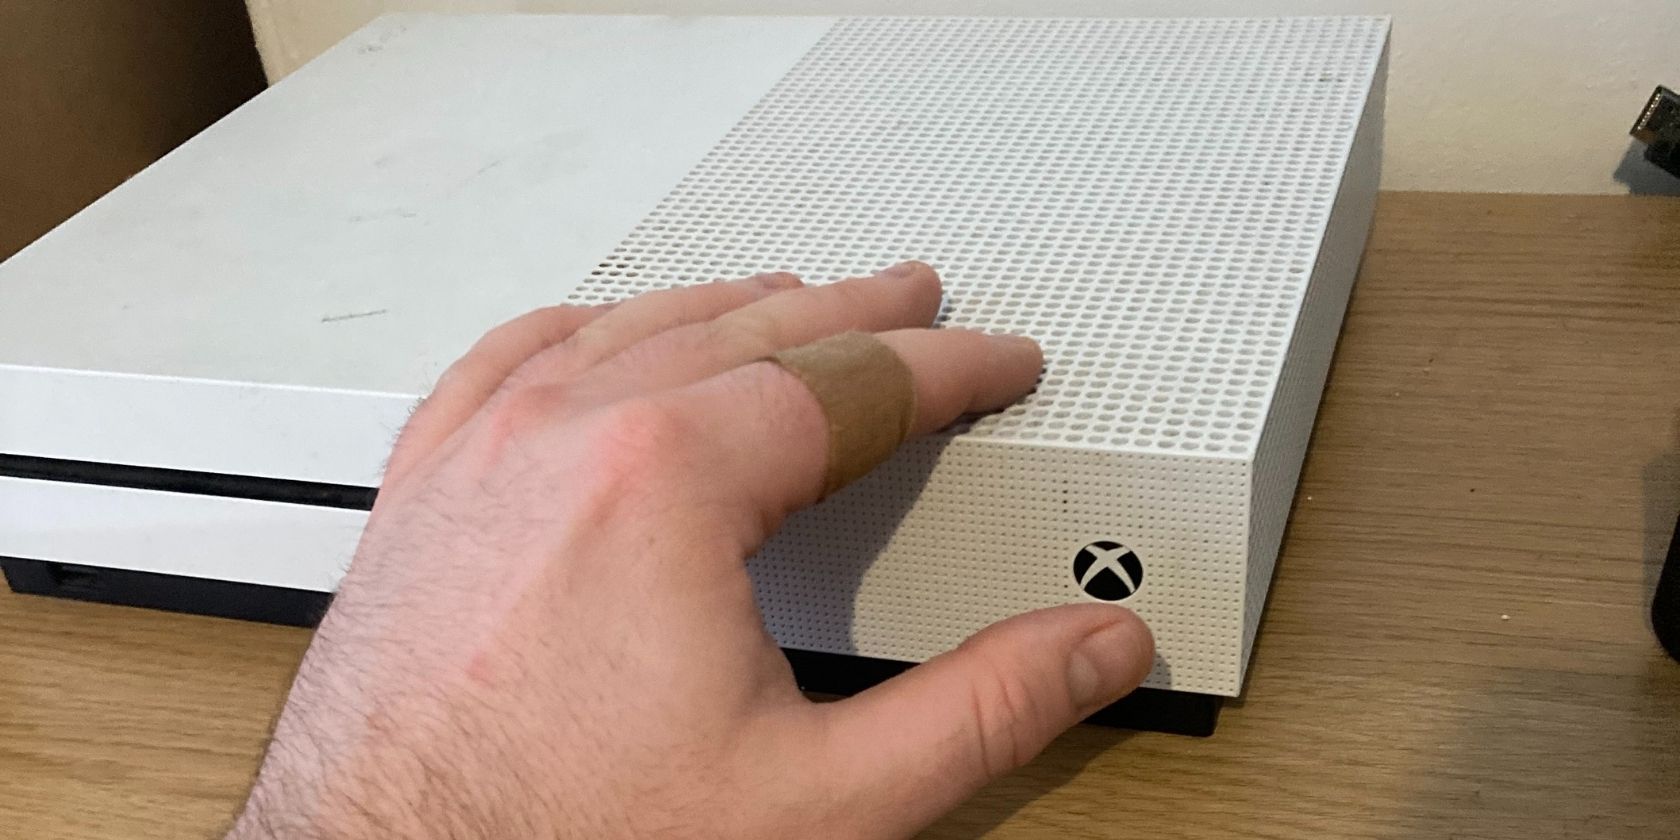 An Xbox One being turned on.